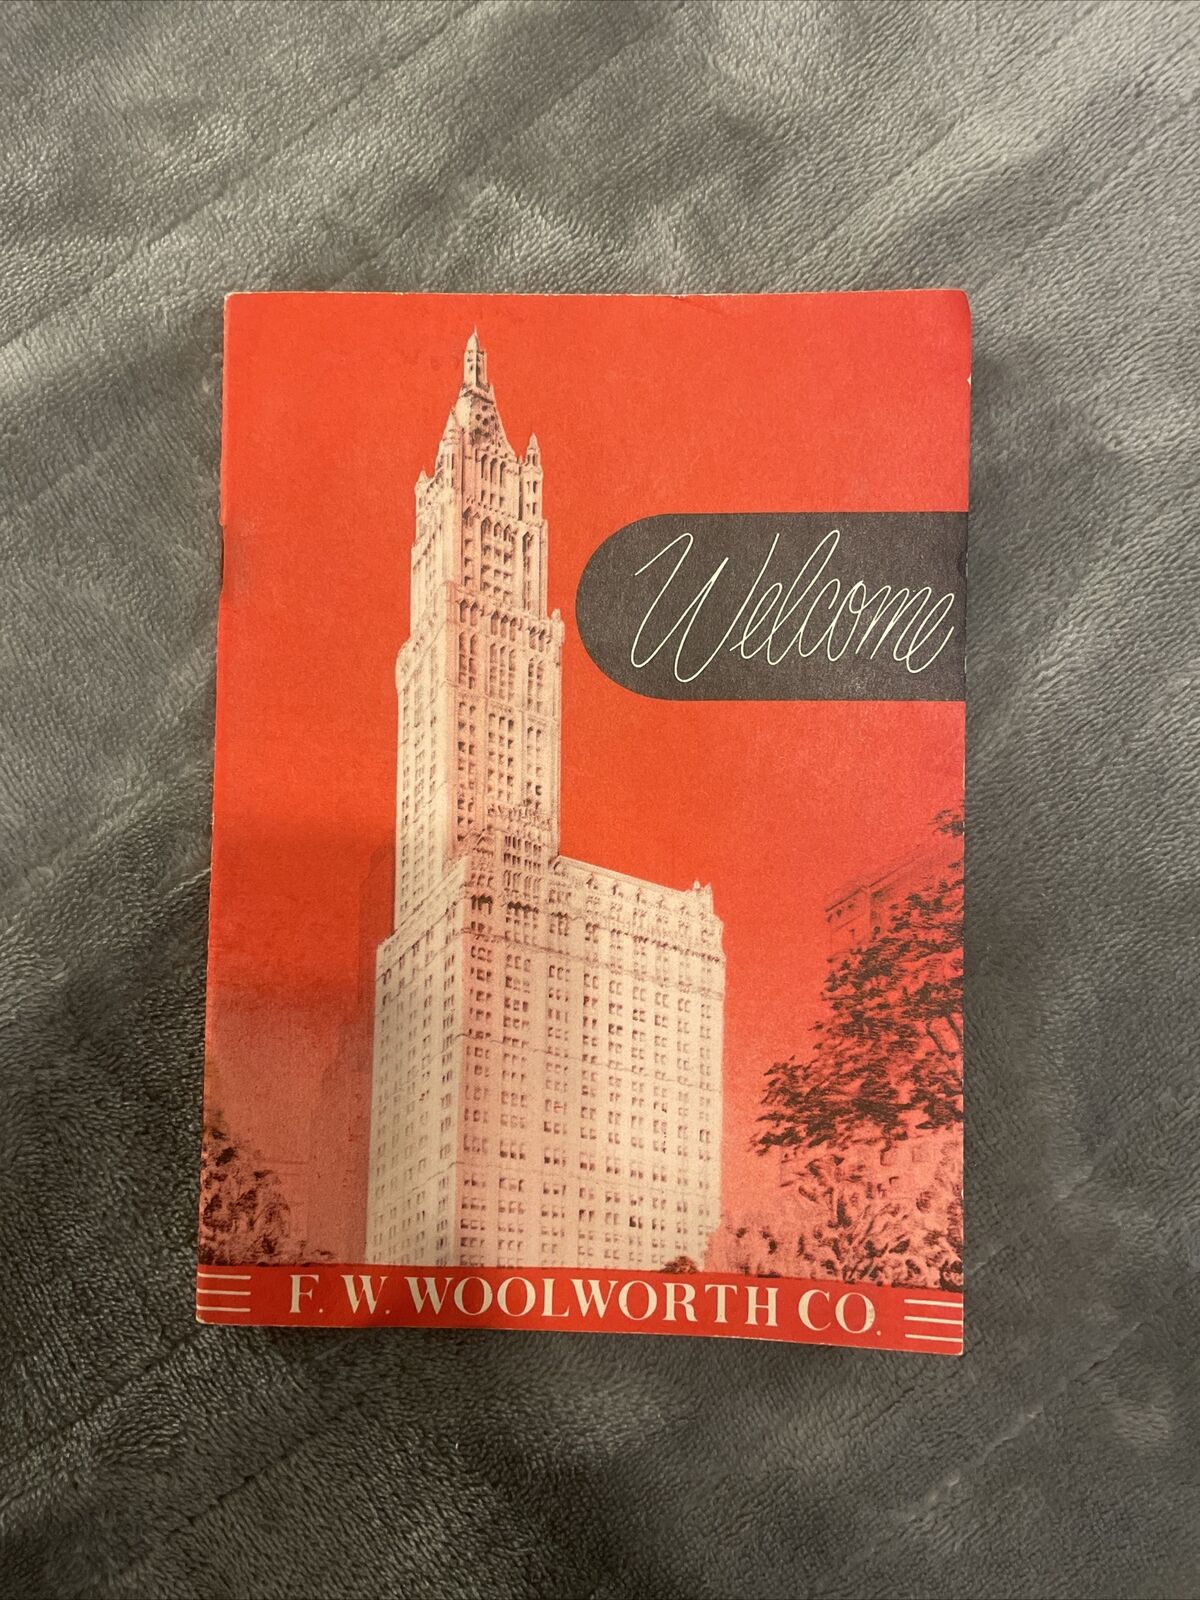 Woolworth New Employee Welcome Policy Booklet Manual Vintage 1952